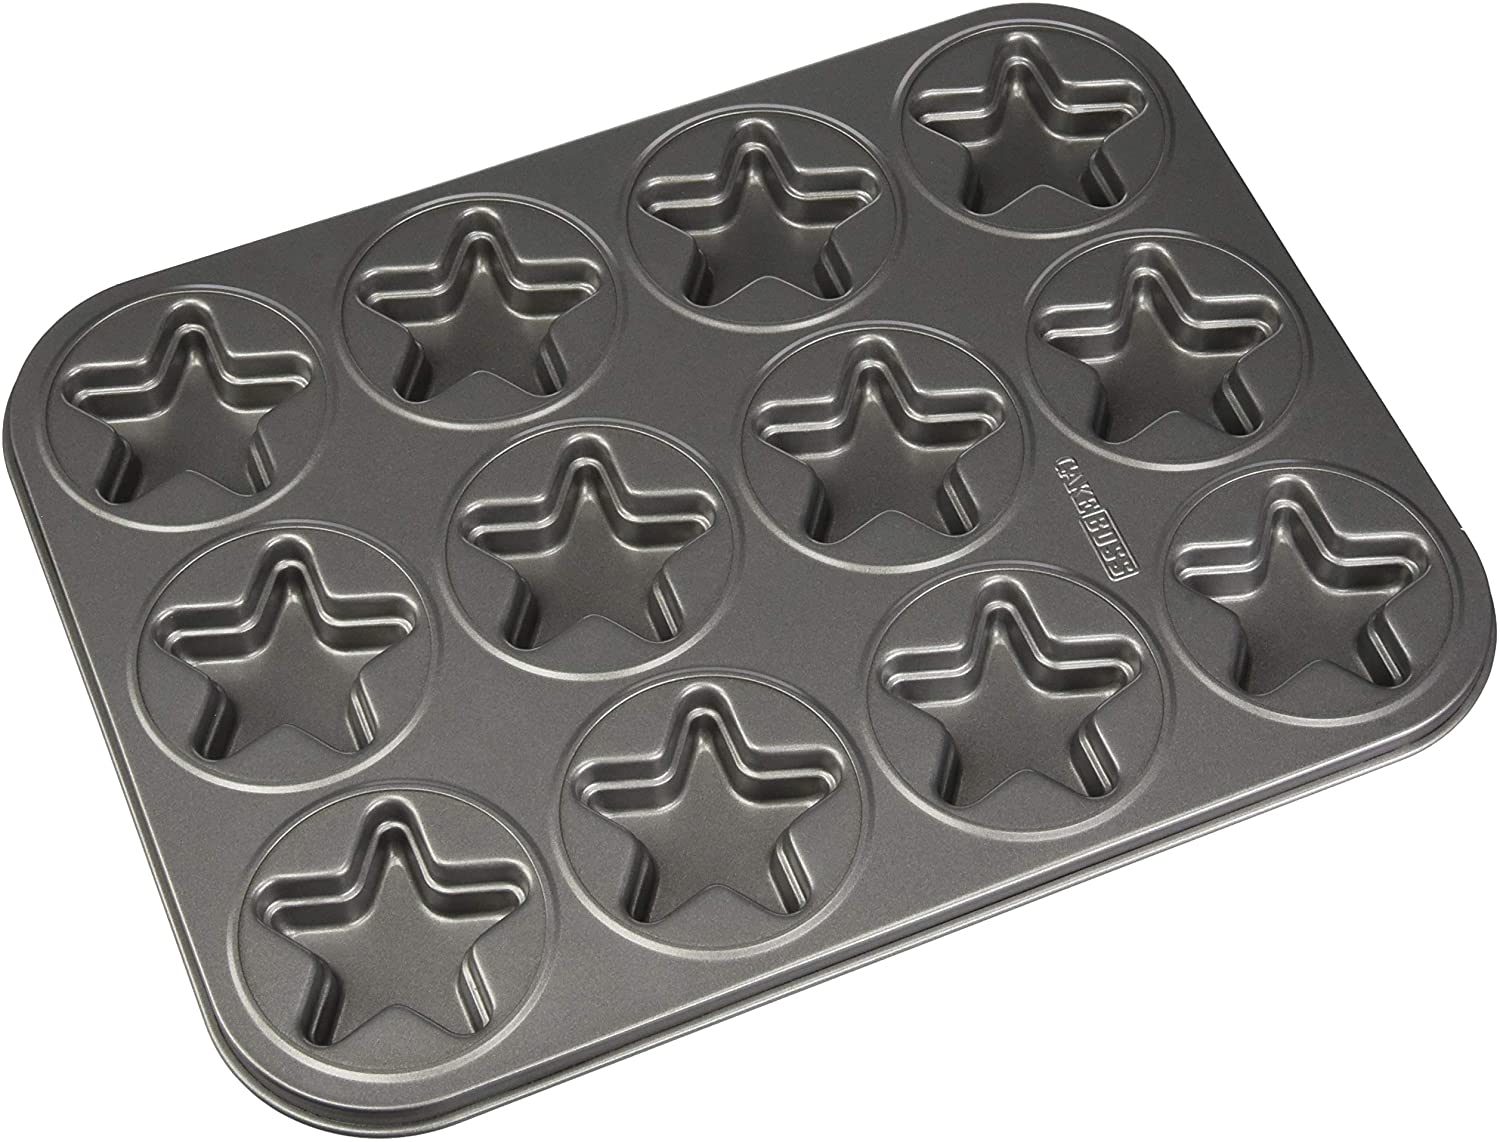 Staedter Städter CB58873 Cake Boss Star Moulds, Set of 12 Stainless Steel Diameter 7 cm, silver, 35 x 27 x 5 cm